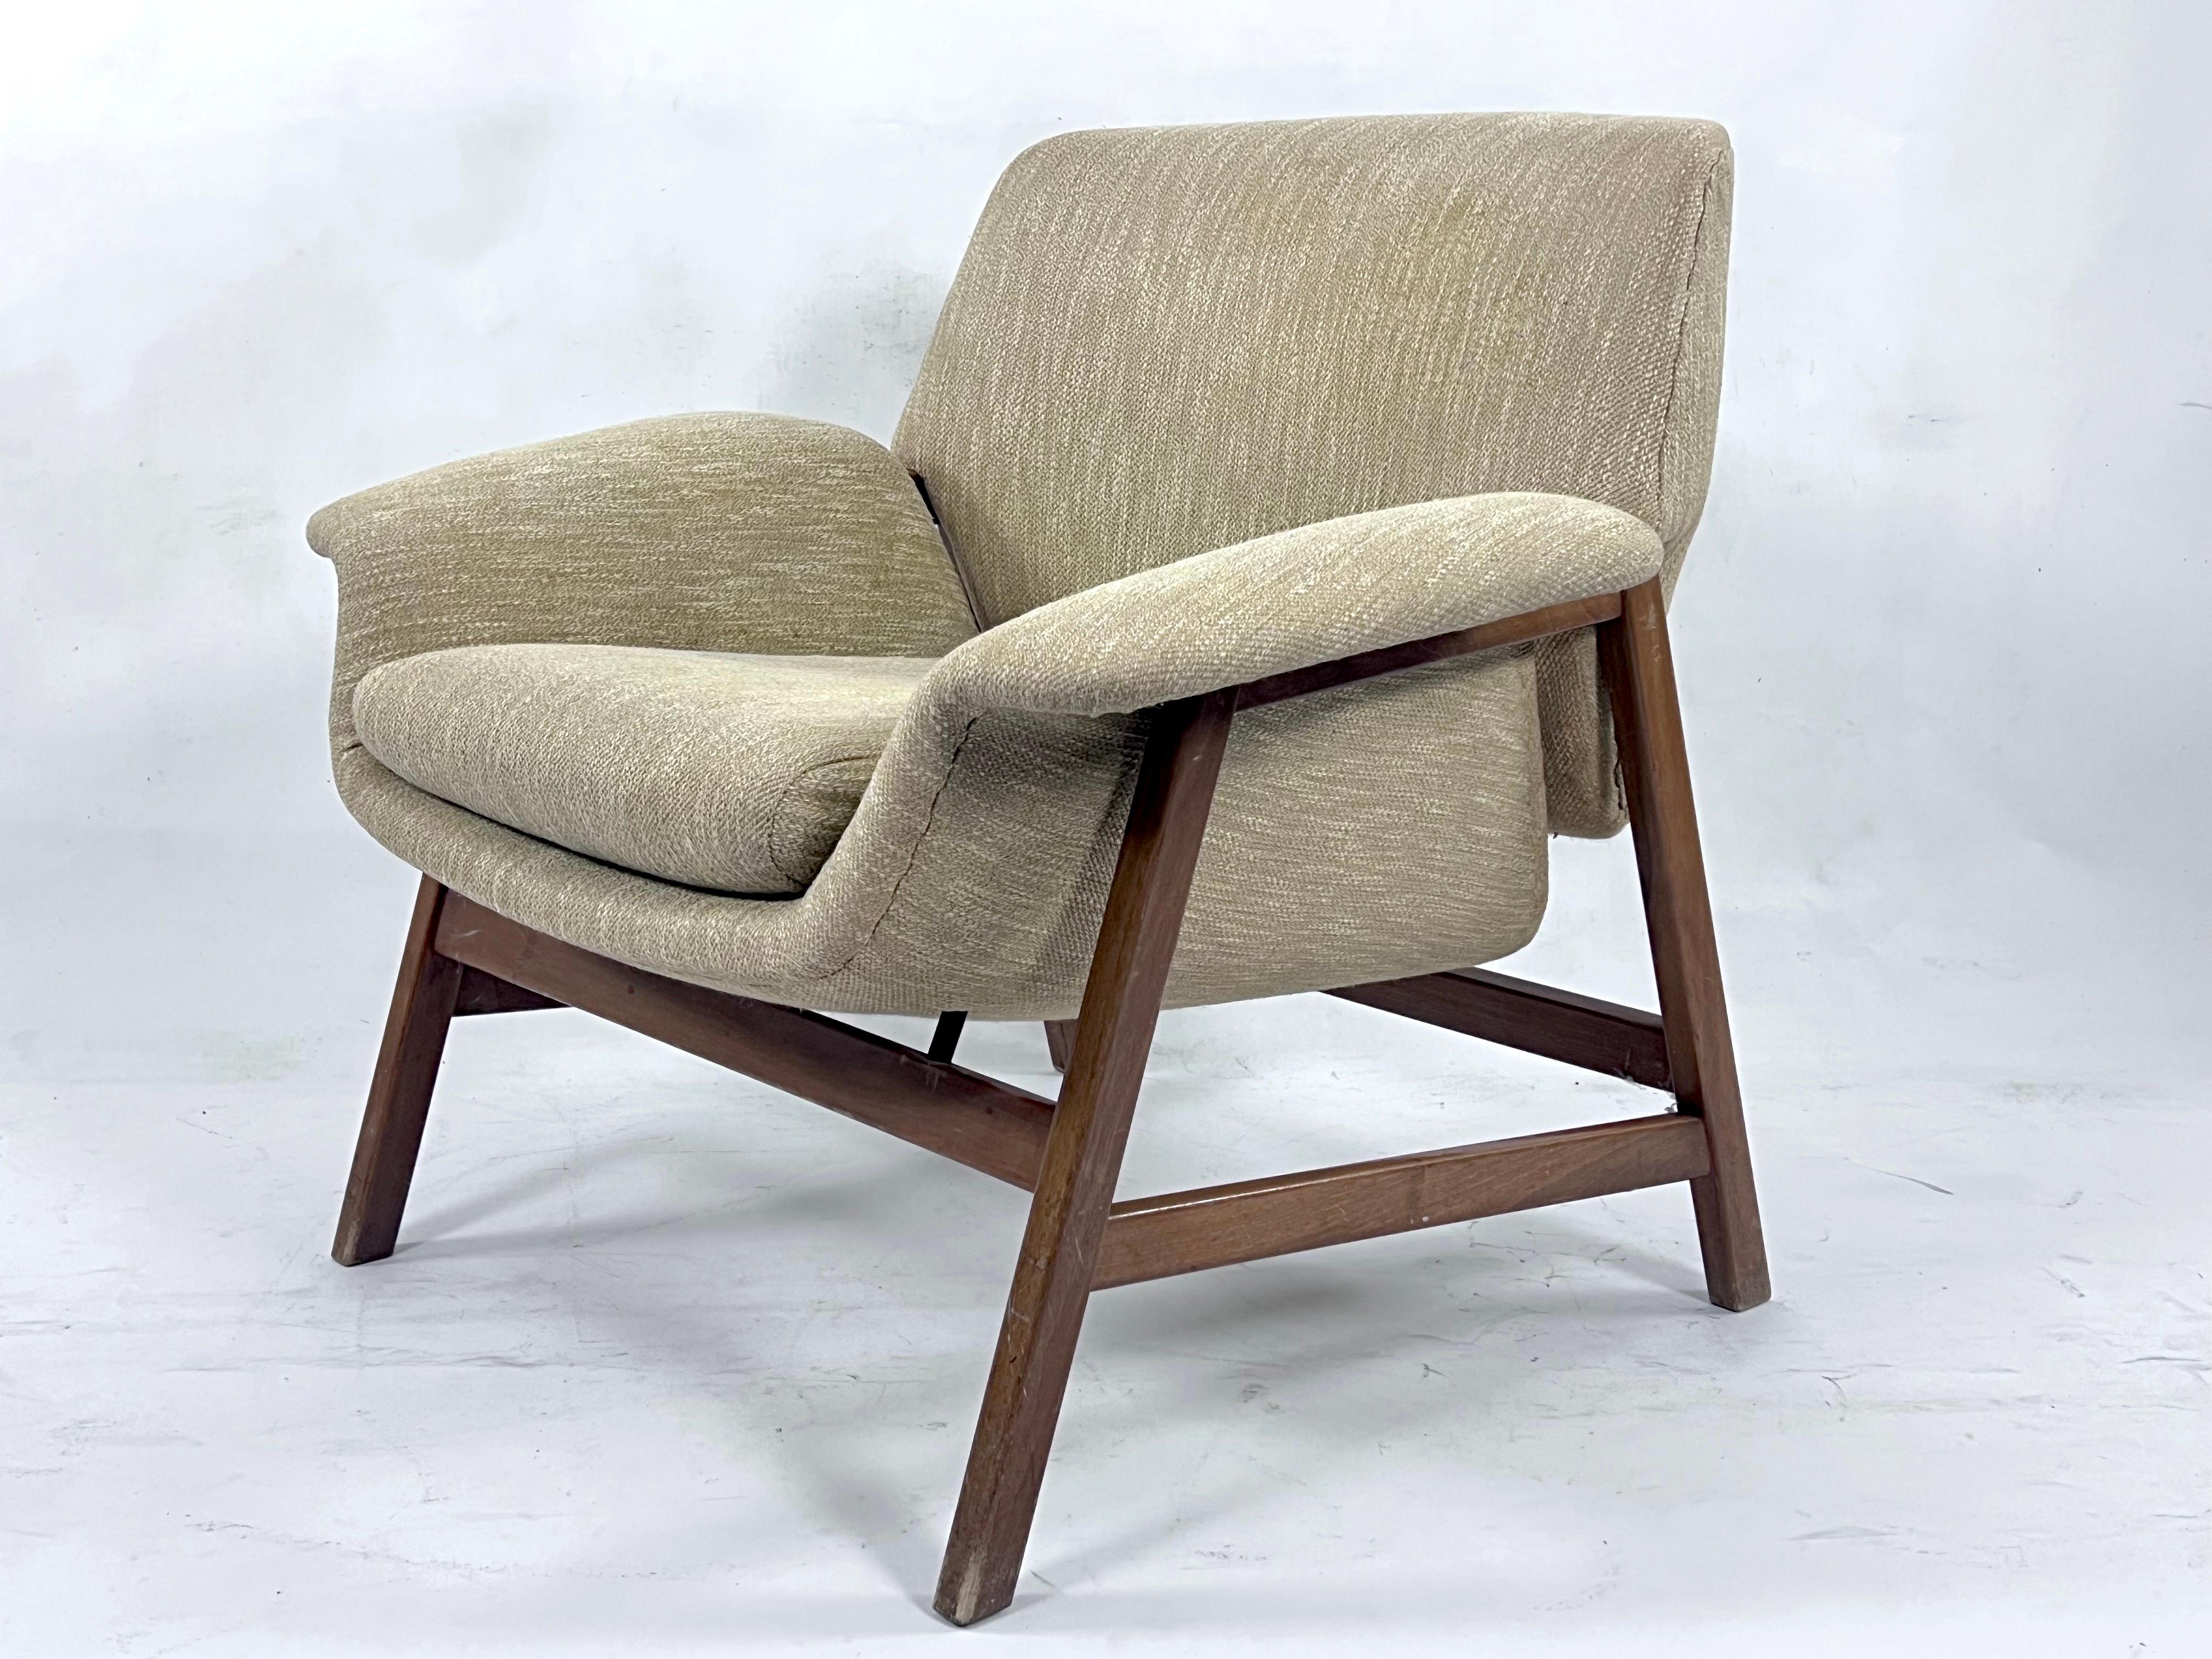 Fabric Gianfranco Frattini, Rare First Serie of Model 849 Armchair, Italy, 1958 For Sale